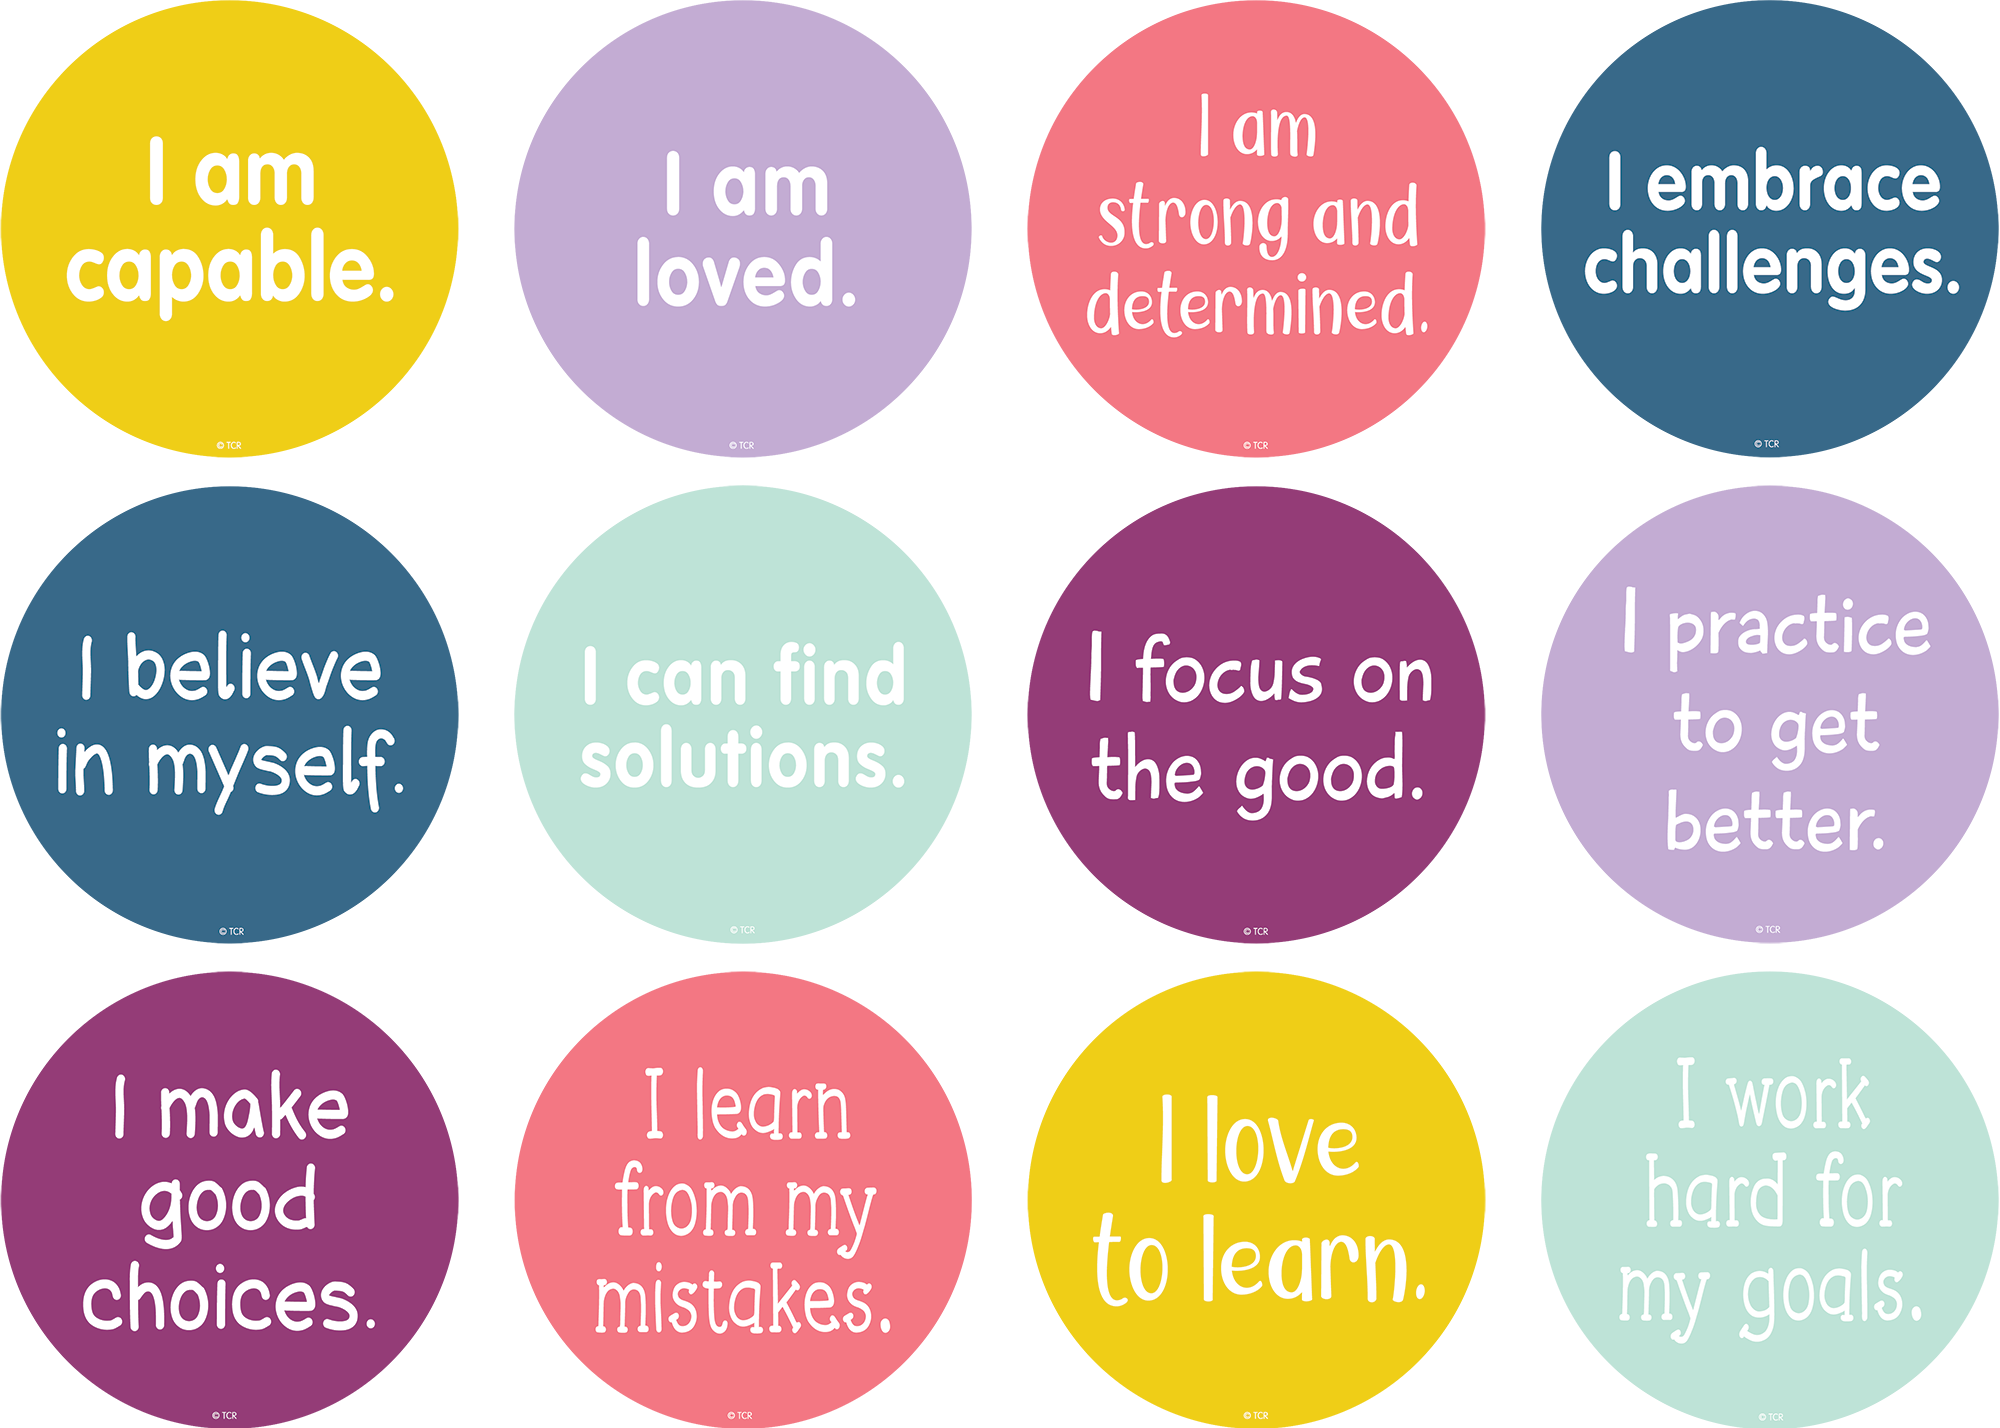 Spot On Positive Sayings Floor Markers, 4 - TCR77509, Teacher Created  Resources